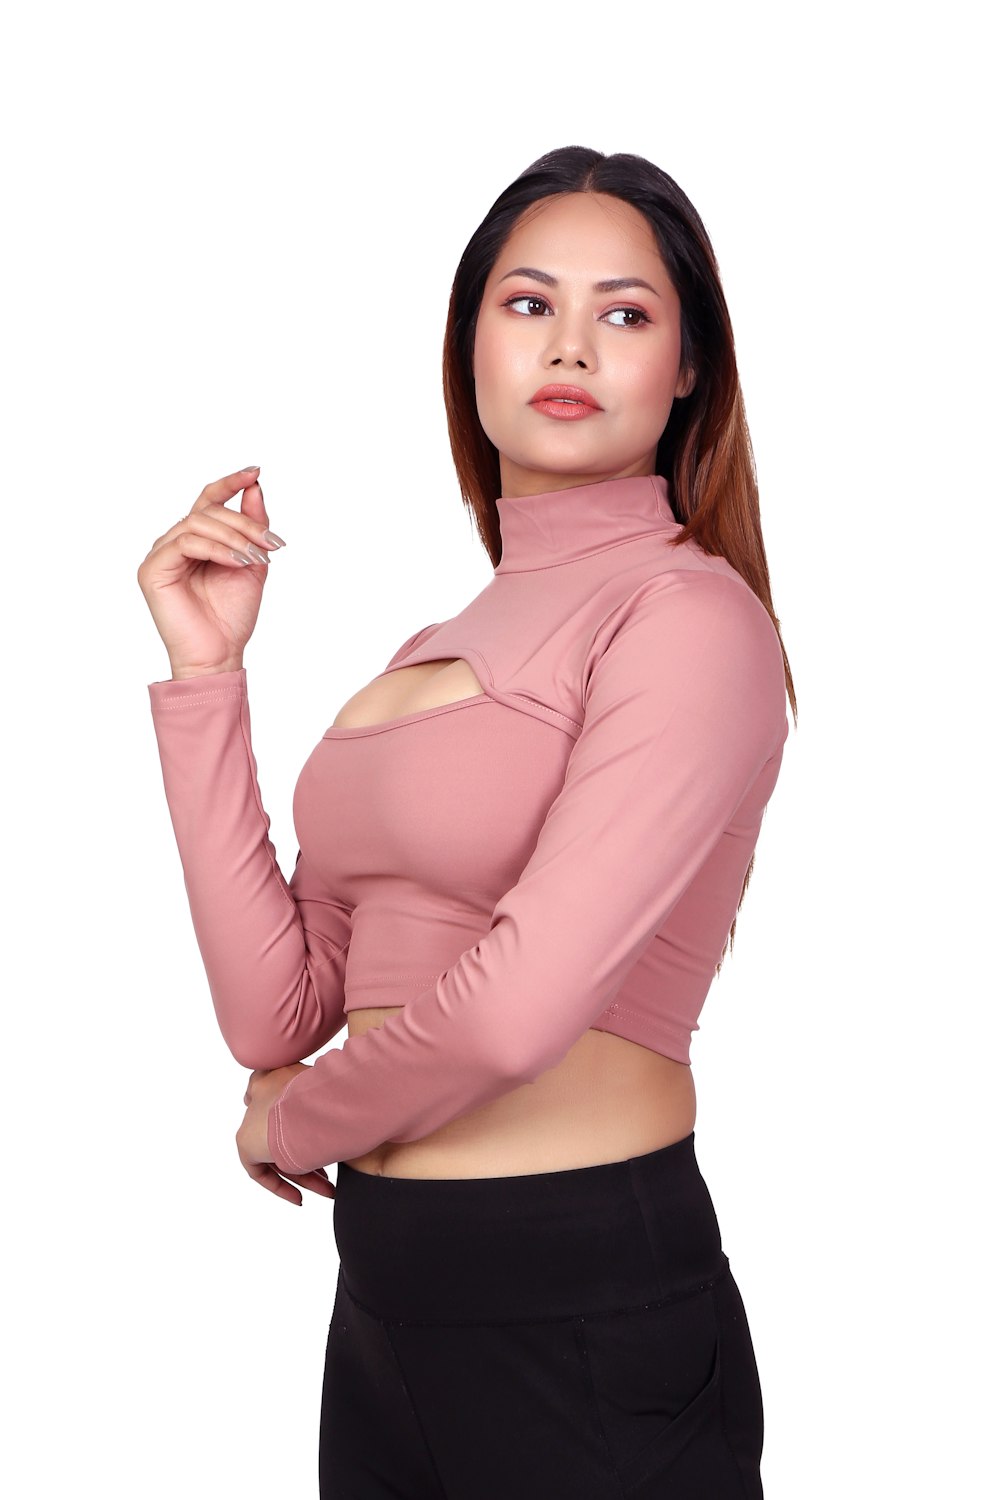 a woman in a pink top smoking a cigarette